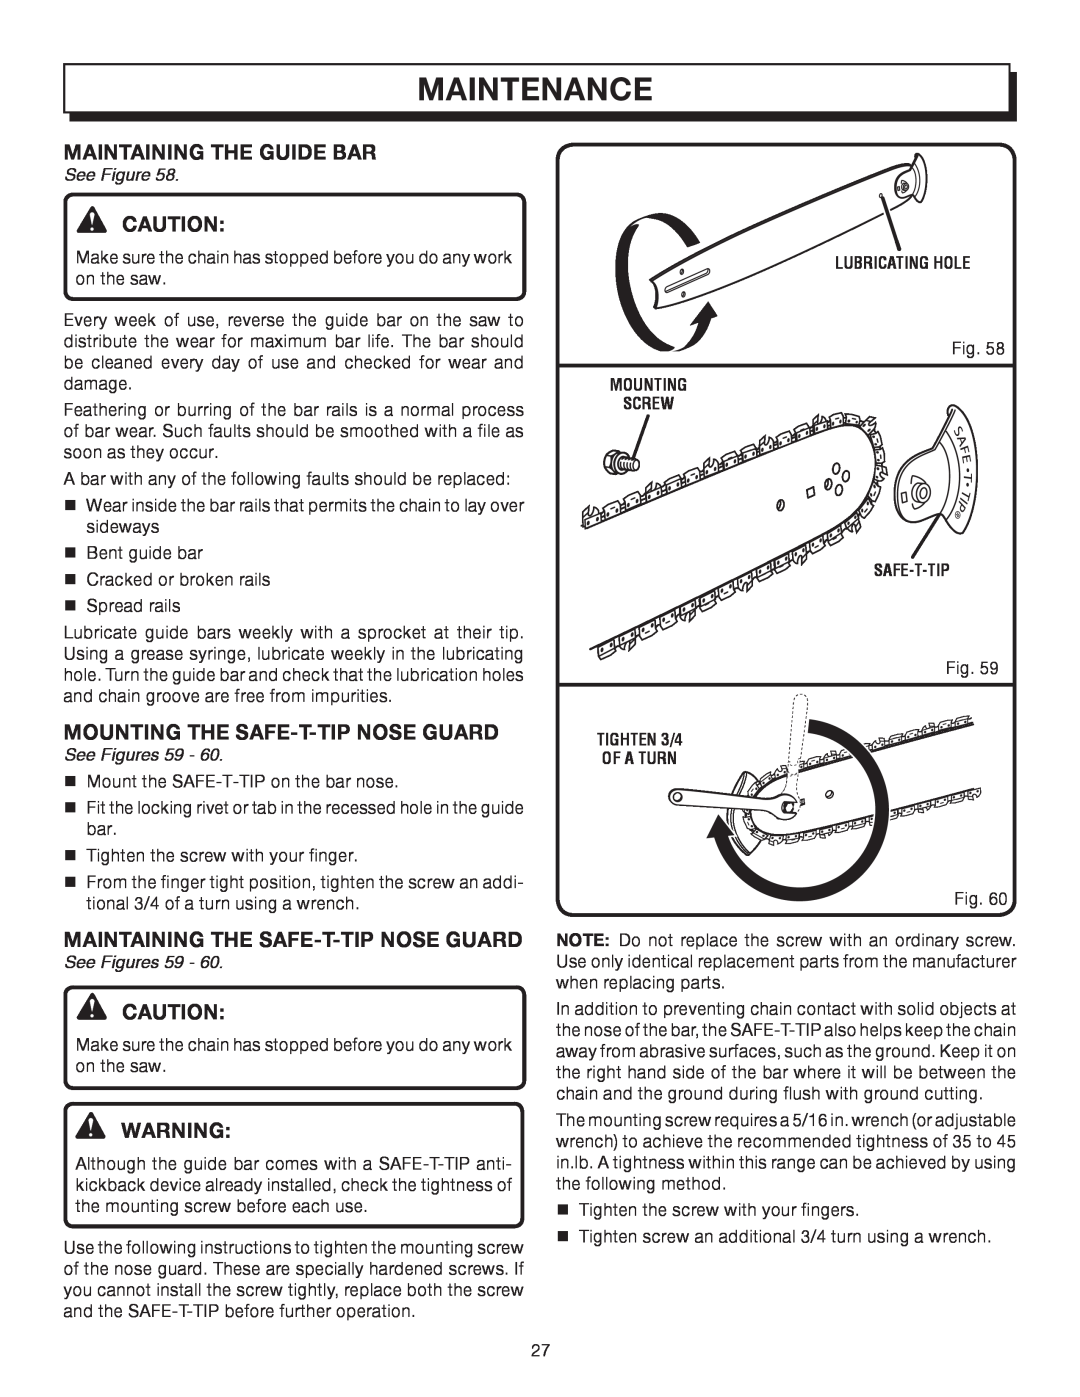 Homelite UT10032 manual Maintenance, See Figures 59, Lubricating Hole, Mounting Screw Safe-T-Tip, TIGHTEN 3/4 OF A TURN 